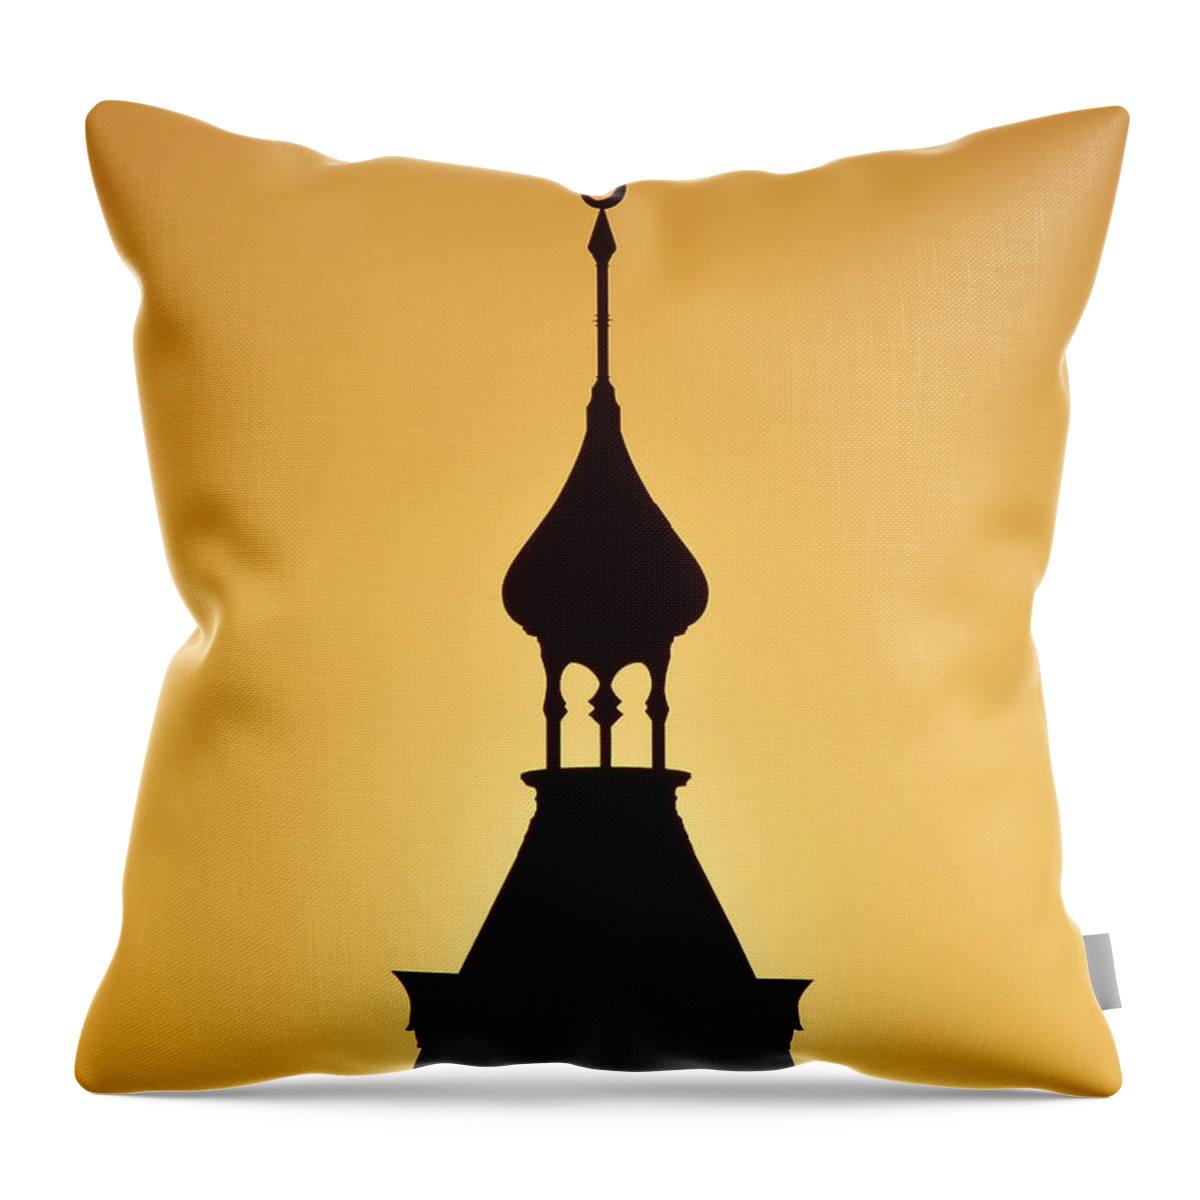 Fine Art Photography Throw Pillow featuring the photograph Minaret by David Lee Thompson